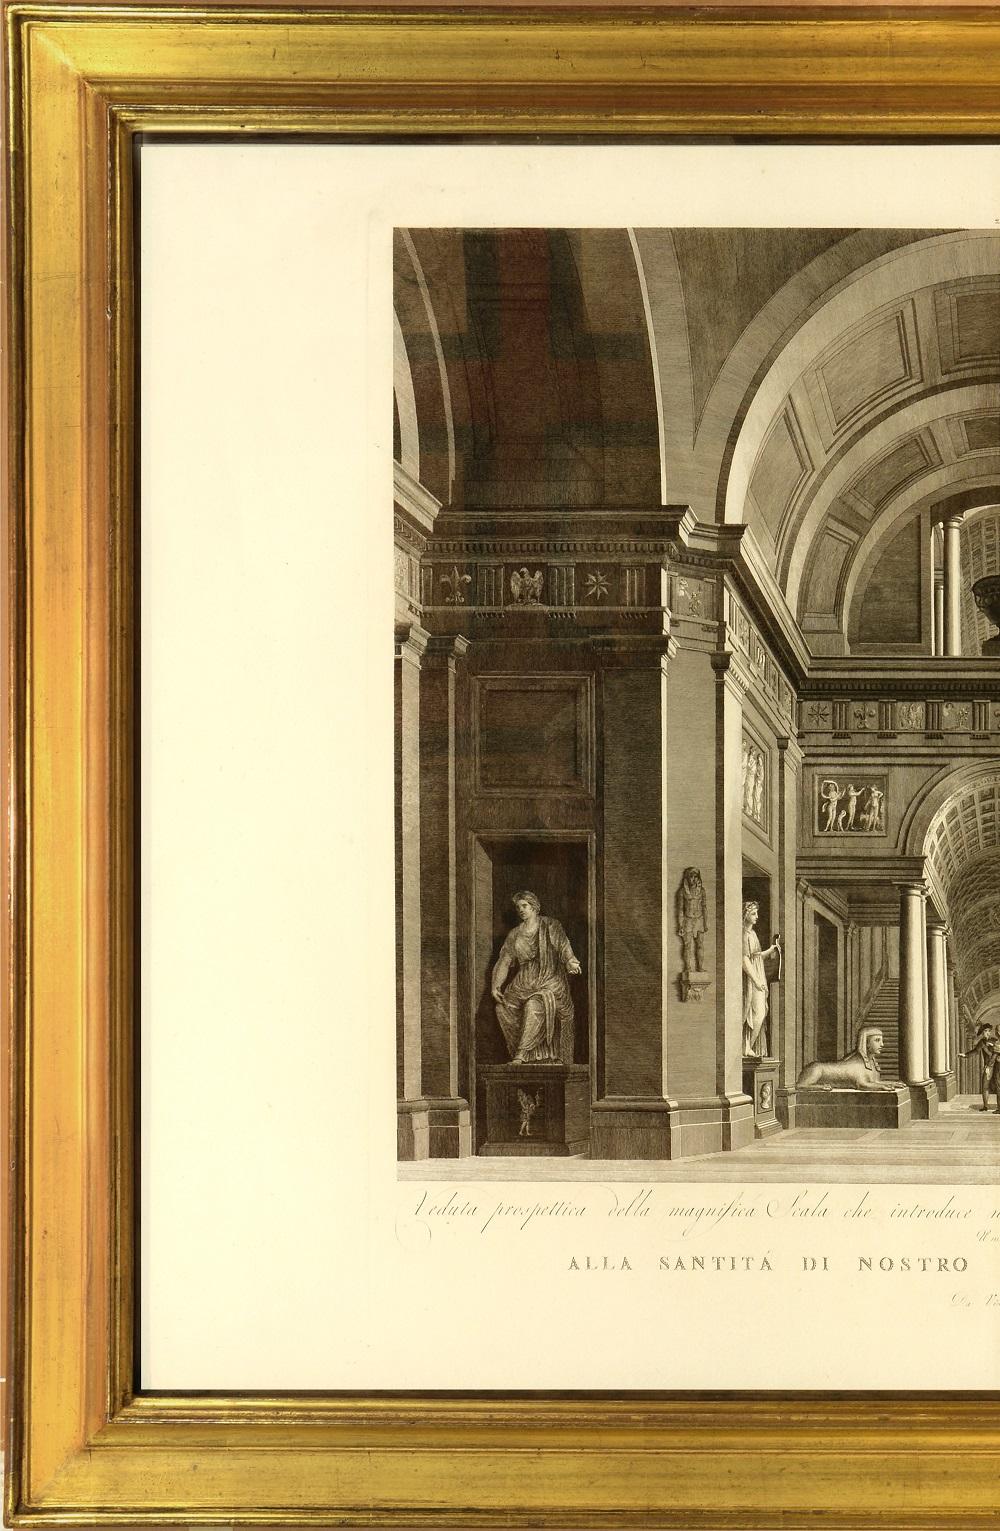 Magnificent large plate illustrating the Vatican Museum at the end of the eighteenth century by Vincenzo Feoli (1750 - 1831) after Miccinelli and Costa.

The Pio-Clementino museum, named after the two popes who oversaw its foundation, Clement XIV